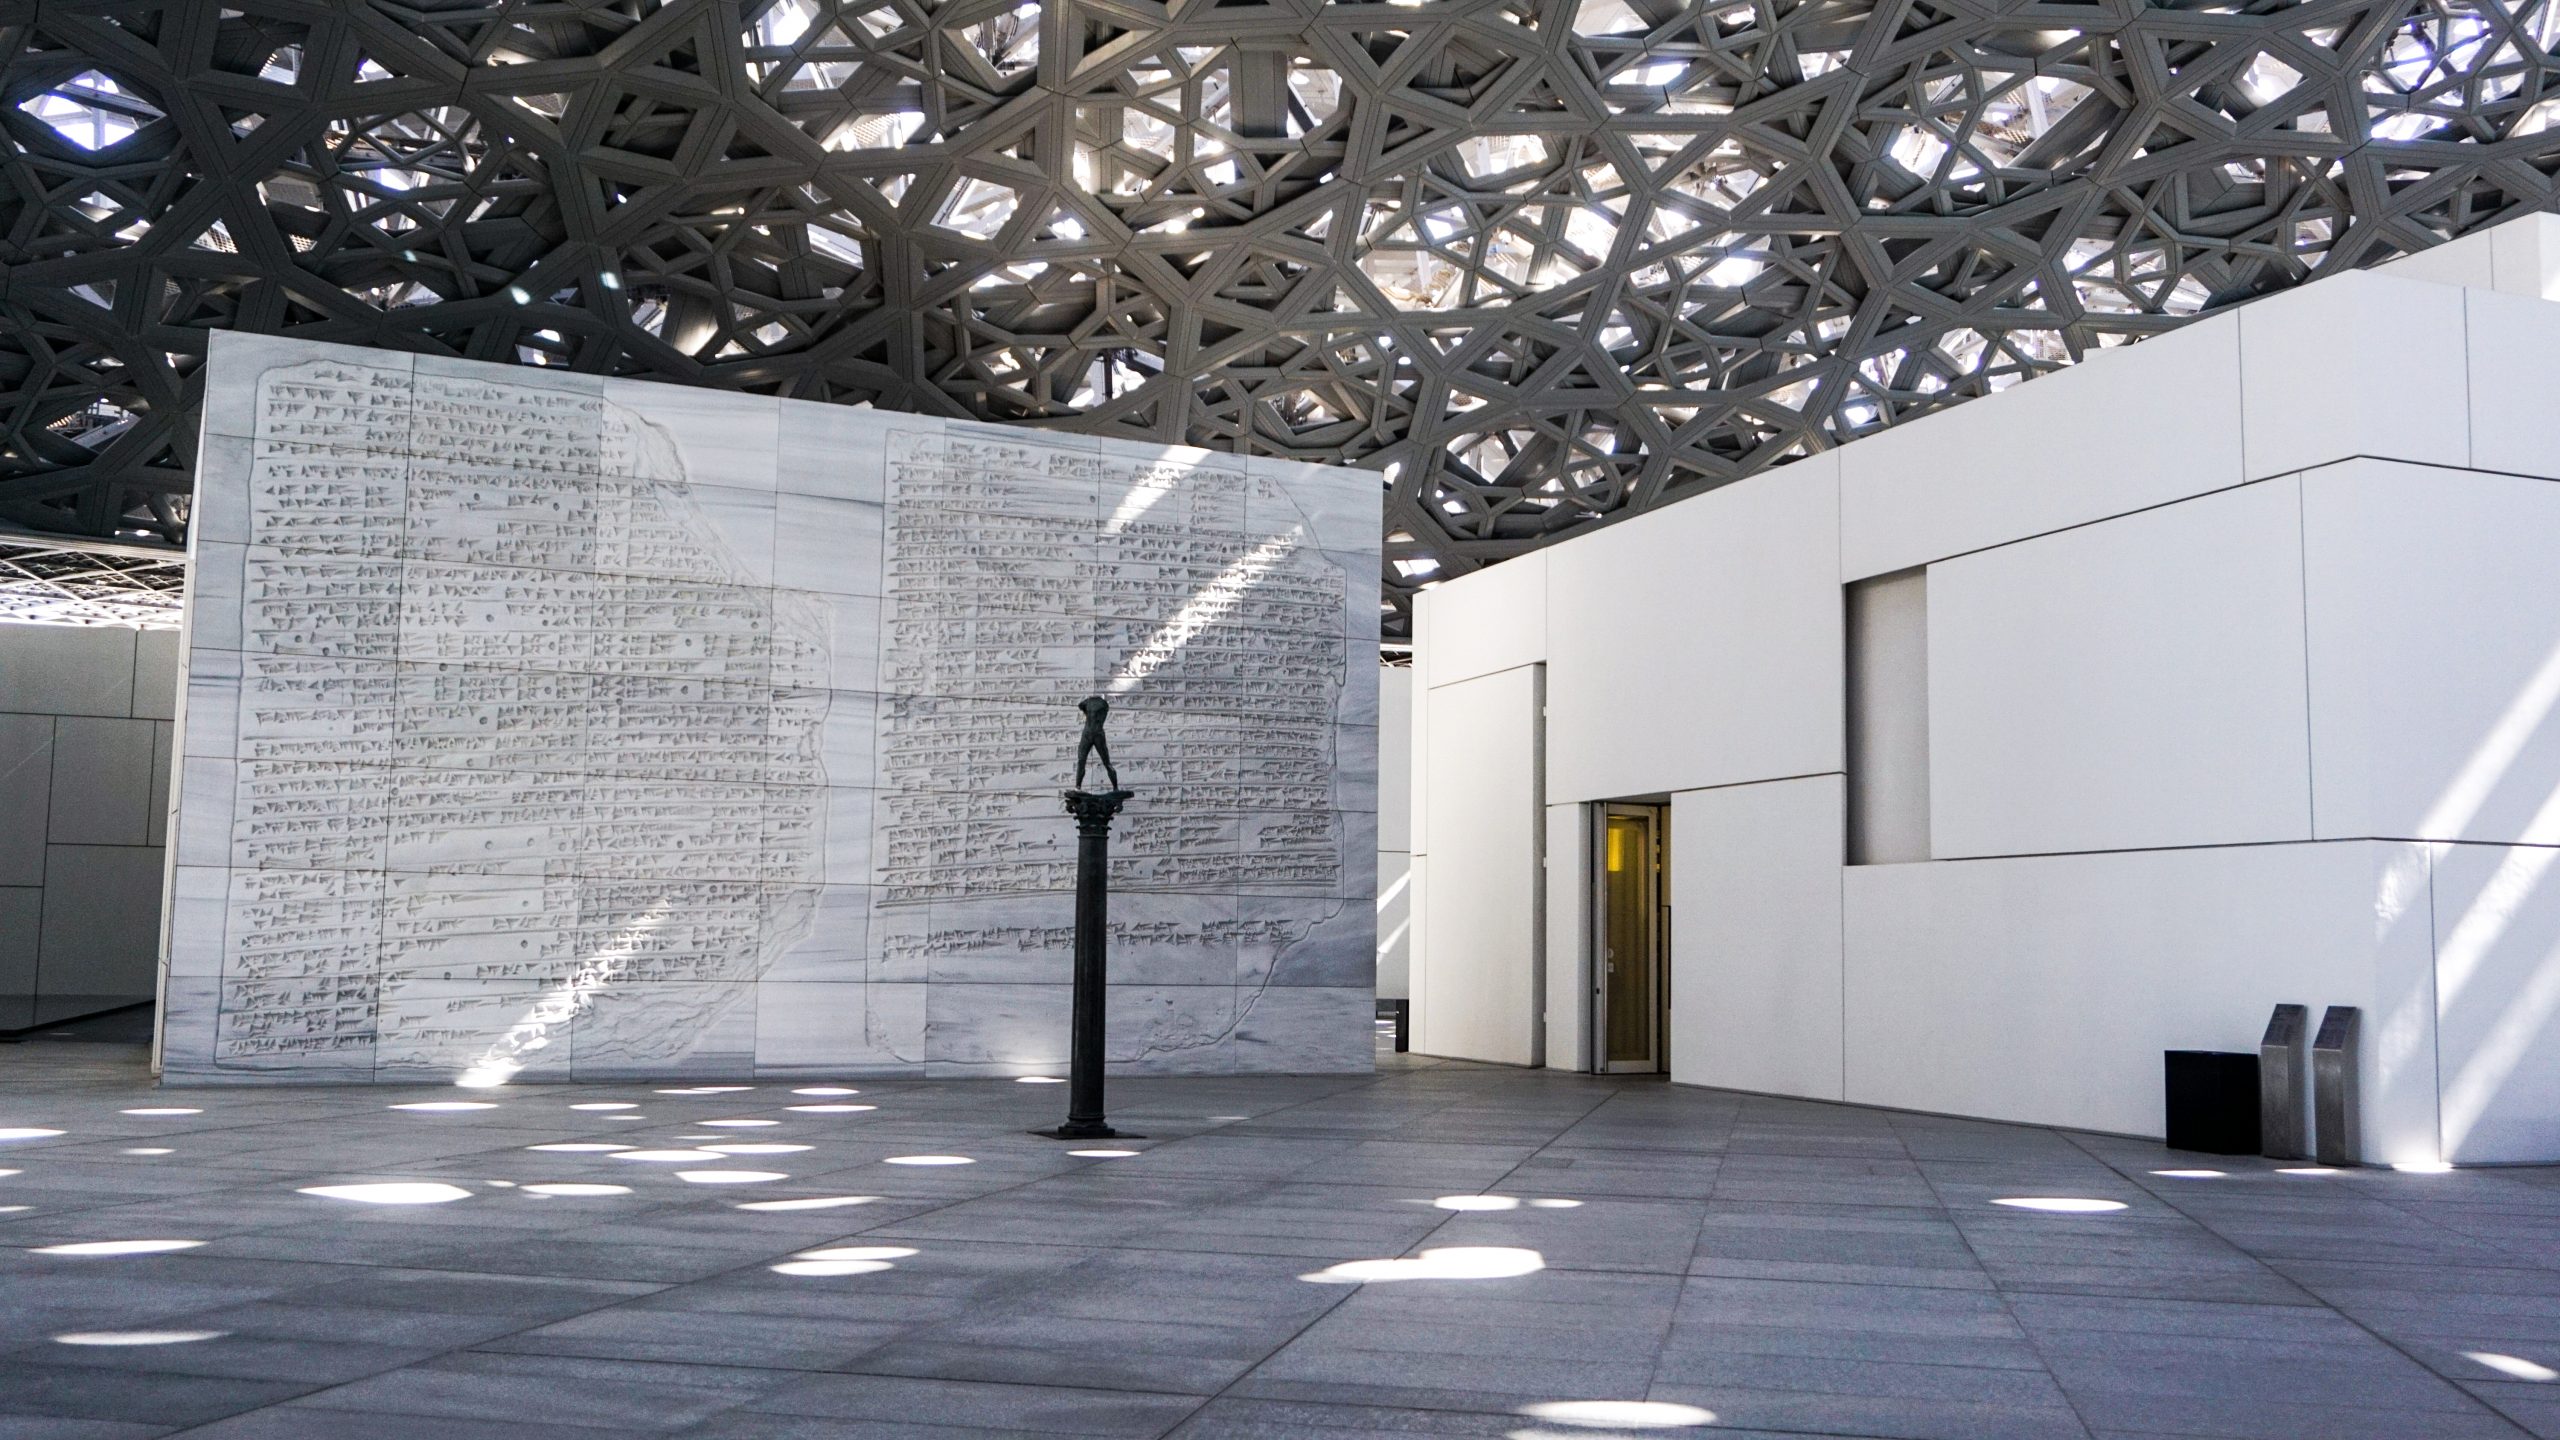 The outdoor spaces of the Louvre Abu Dhabi with a statue in the middle from Dubai Itinerary Day 6